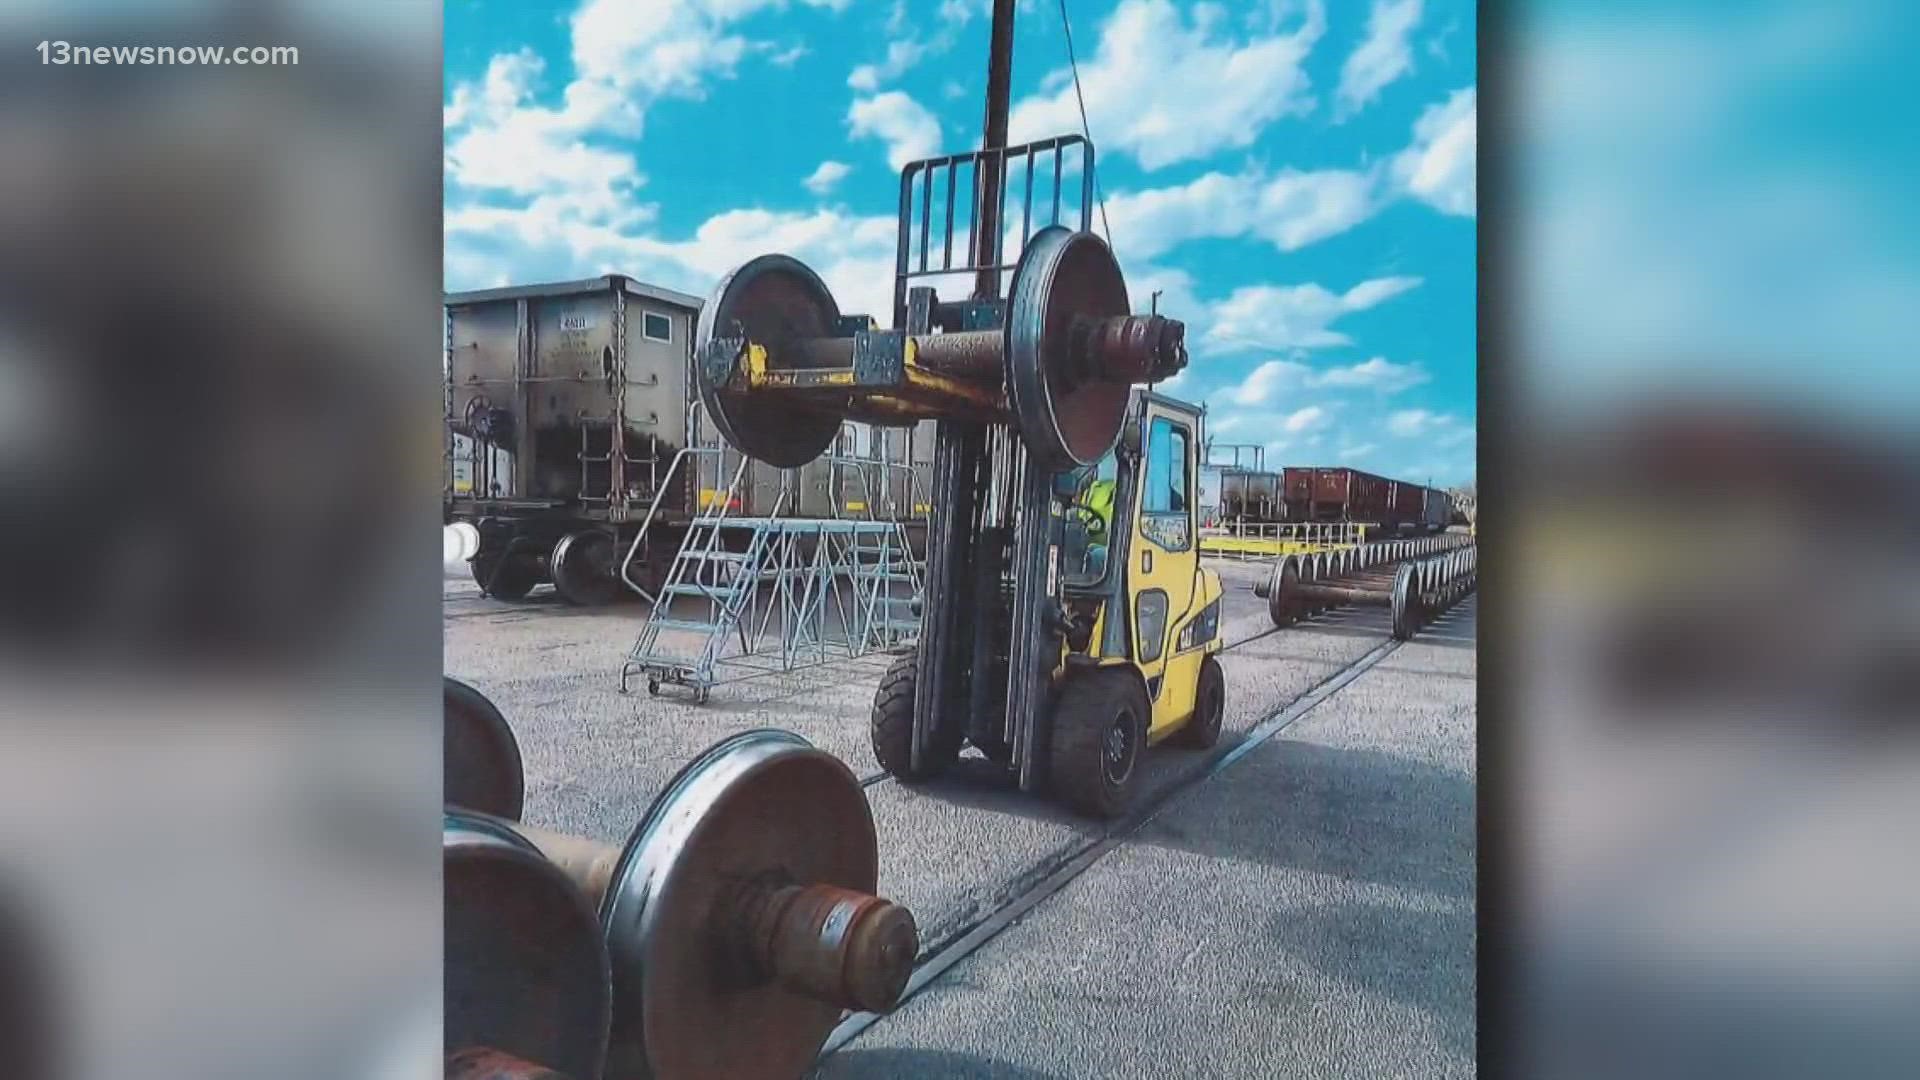 Raymond Riddick sued after he was hurt at the company's rail yard in 2019. He was injured trying to get out of the way of train wheels that employees were loading.